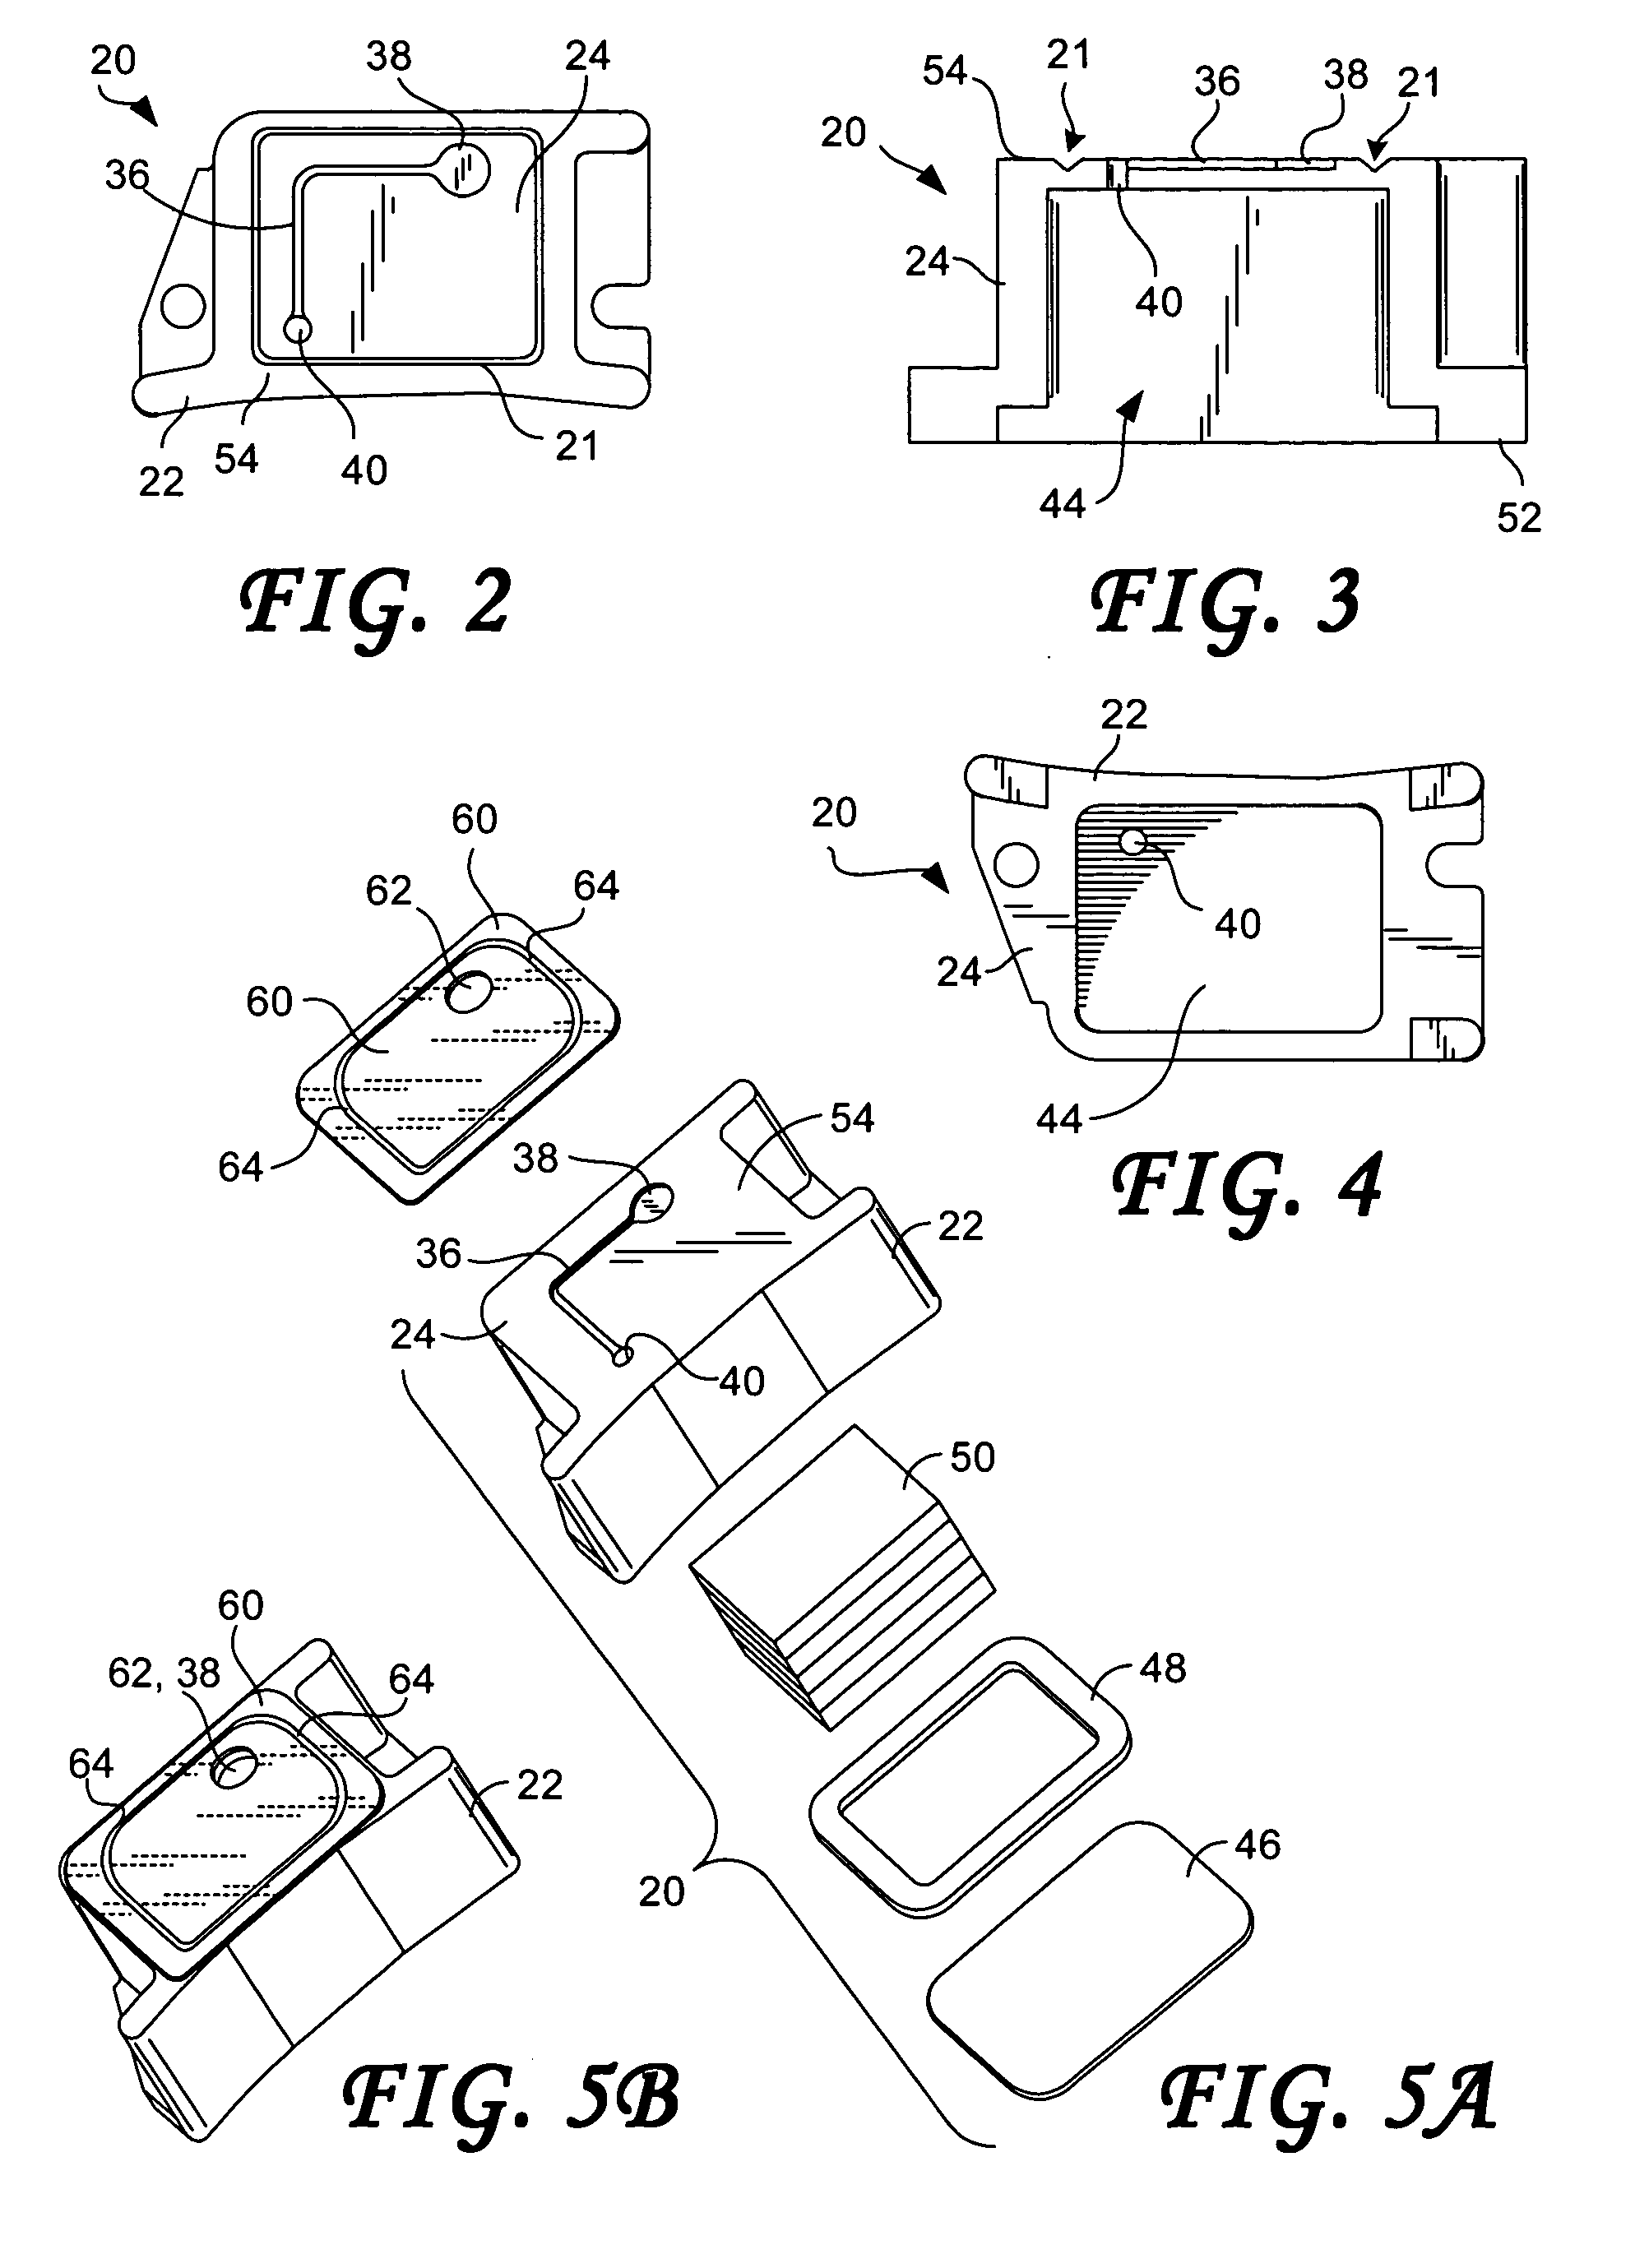 Disk drive configured to enable non destructive leak detection at the interface between a drive sub-component and the disk drive housing